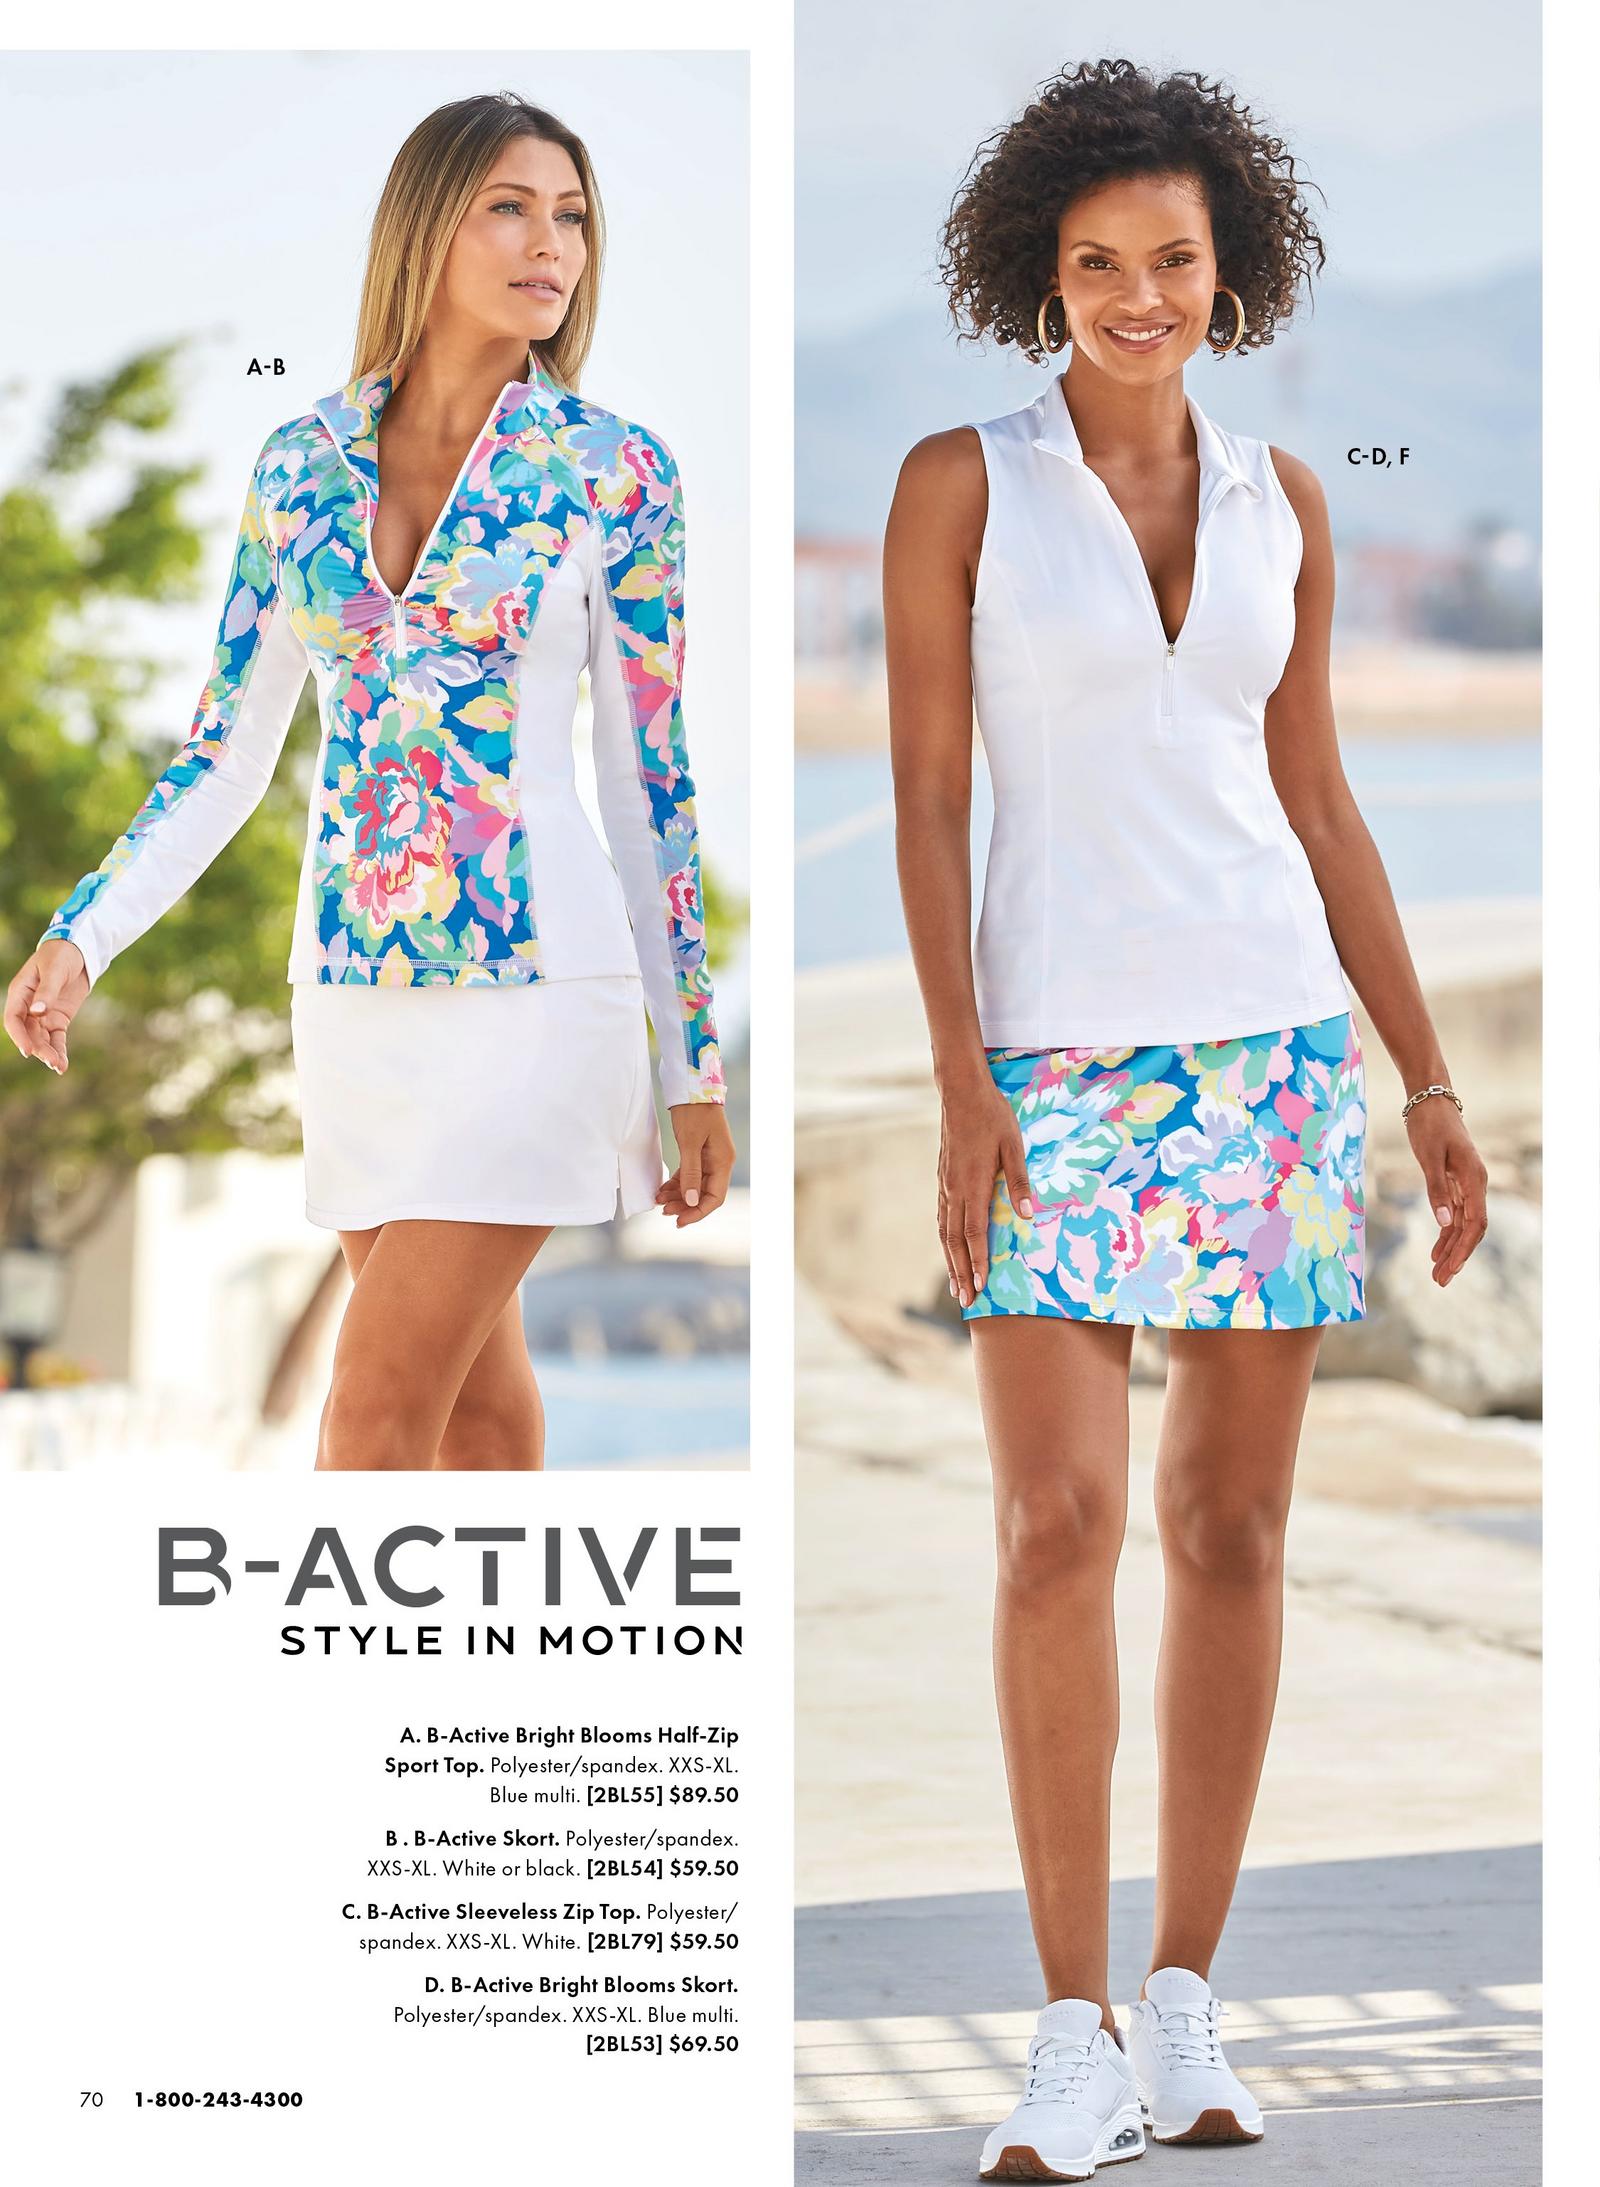 left model wearing a floral print half-zip sport top and white skort. right model wearing a white sleeveless collared half-zip top, floral print skort, gold hoop earrings, and white sneakers.